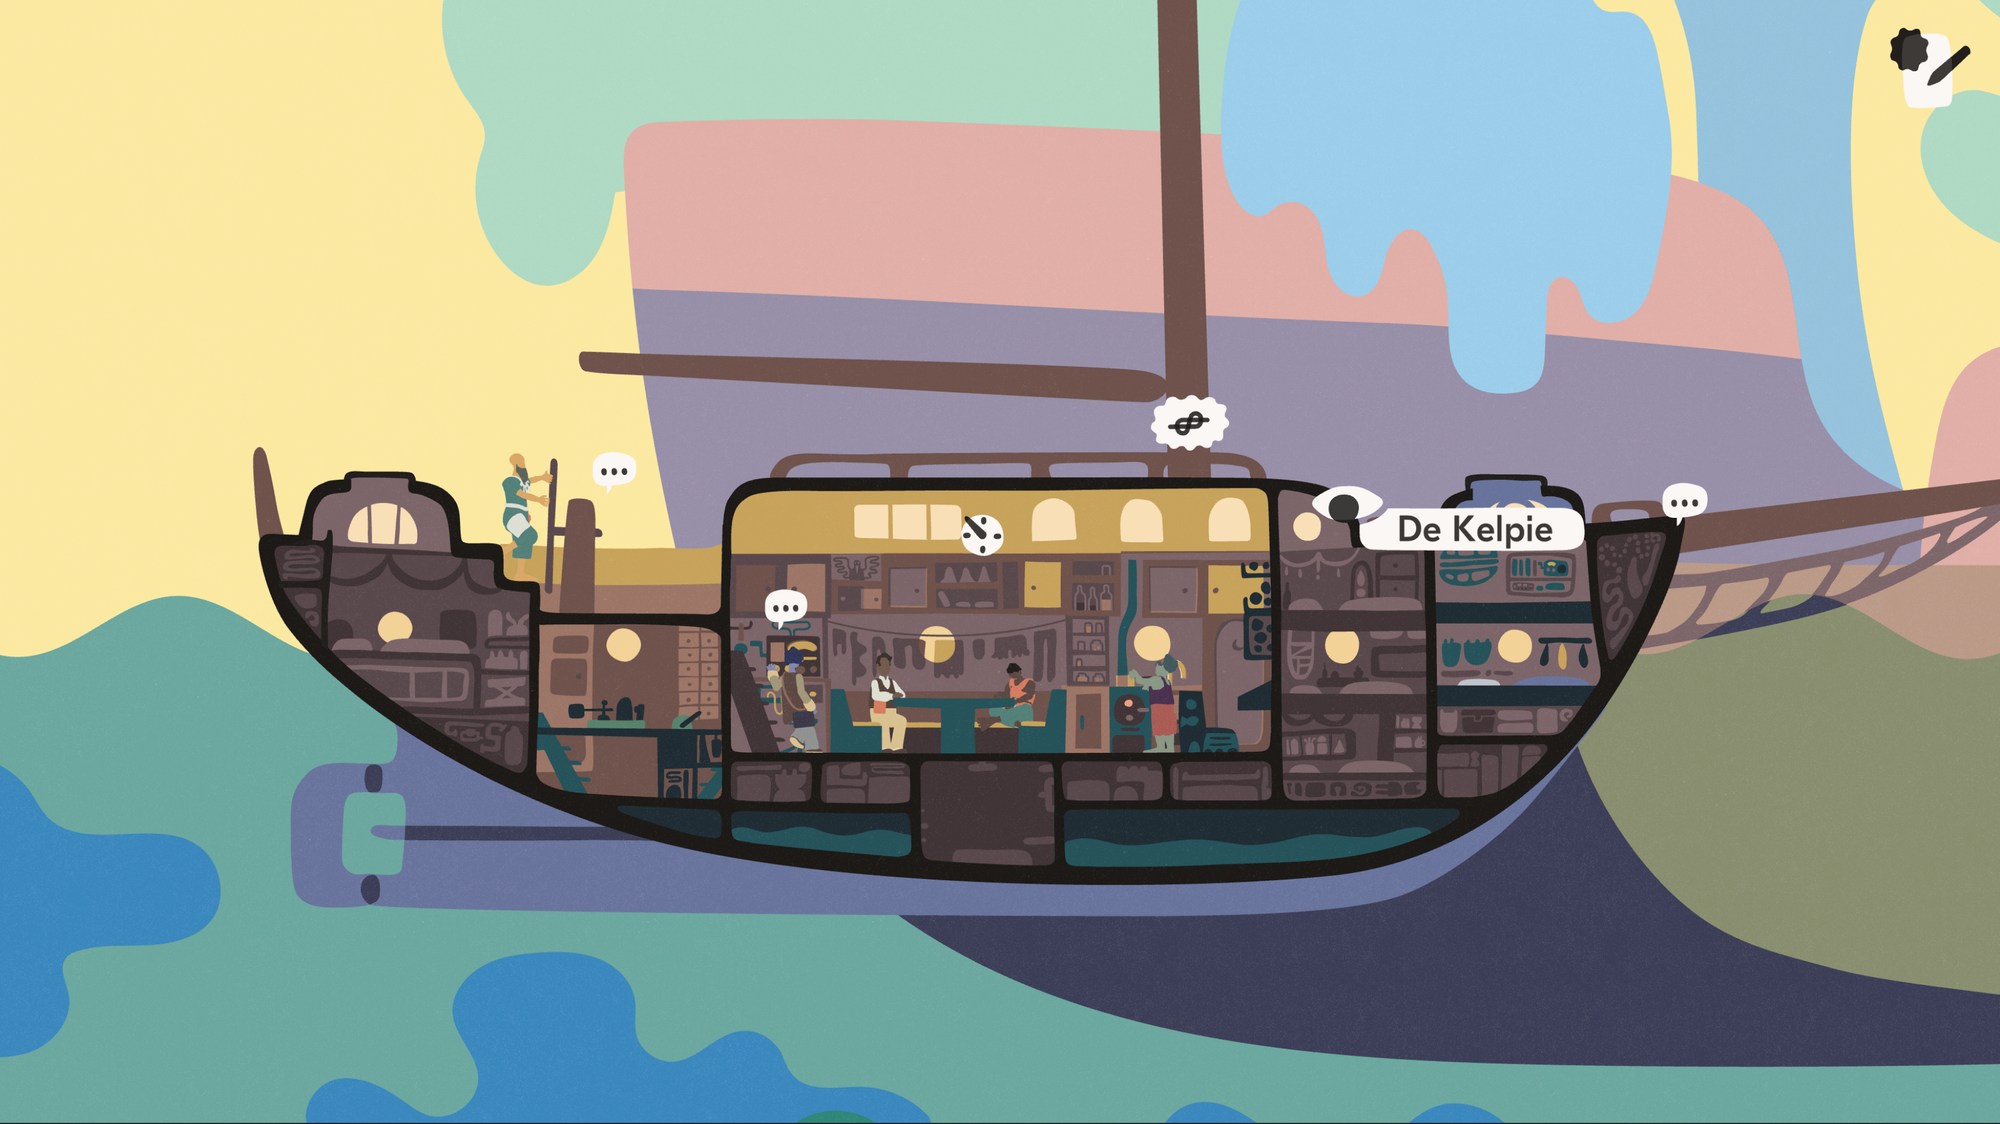 A screenshot of the boat with different icons inviting you to engage with the characters